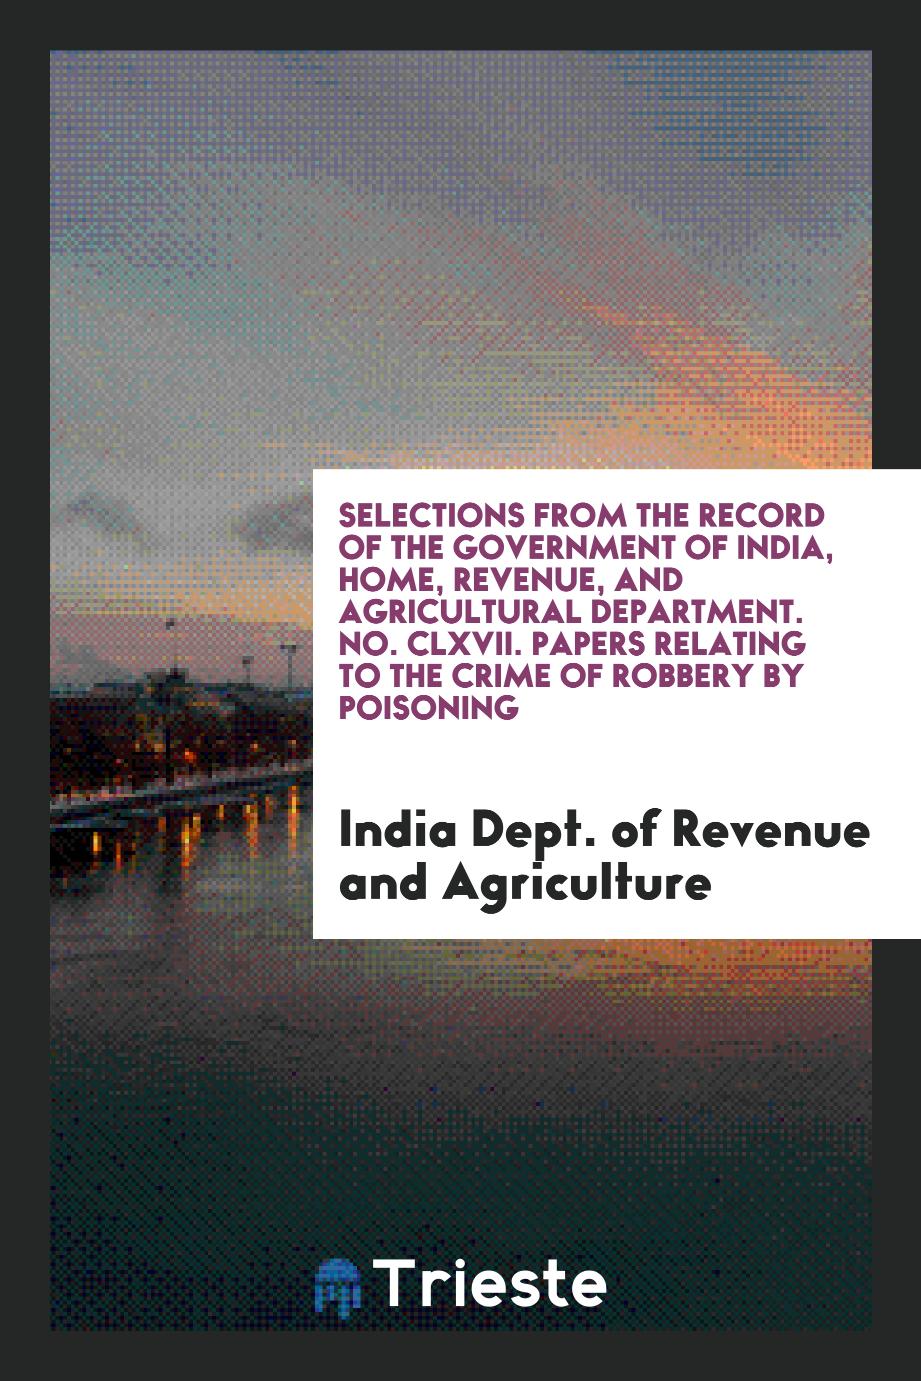 Selections from the Record of the Government of India, Home, Revenue, and Agricultural Department. No. CLXVII. Papers Relating to the Crime of Robbery by Poisoning